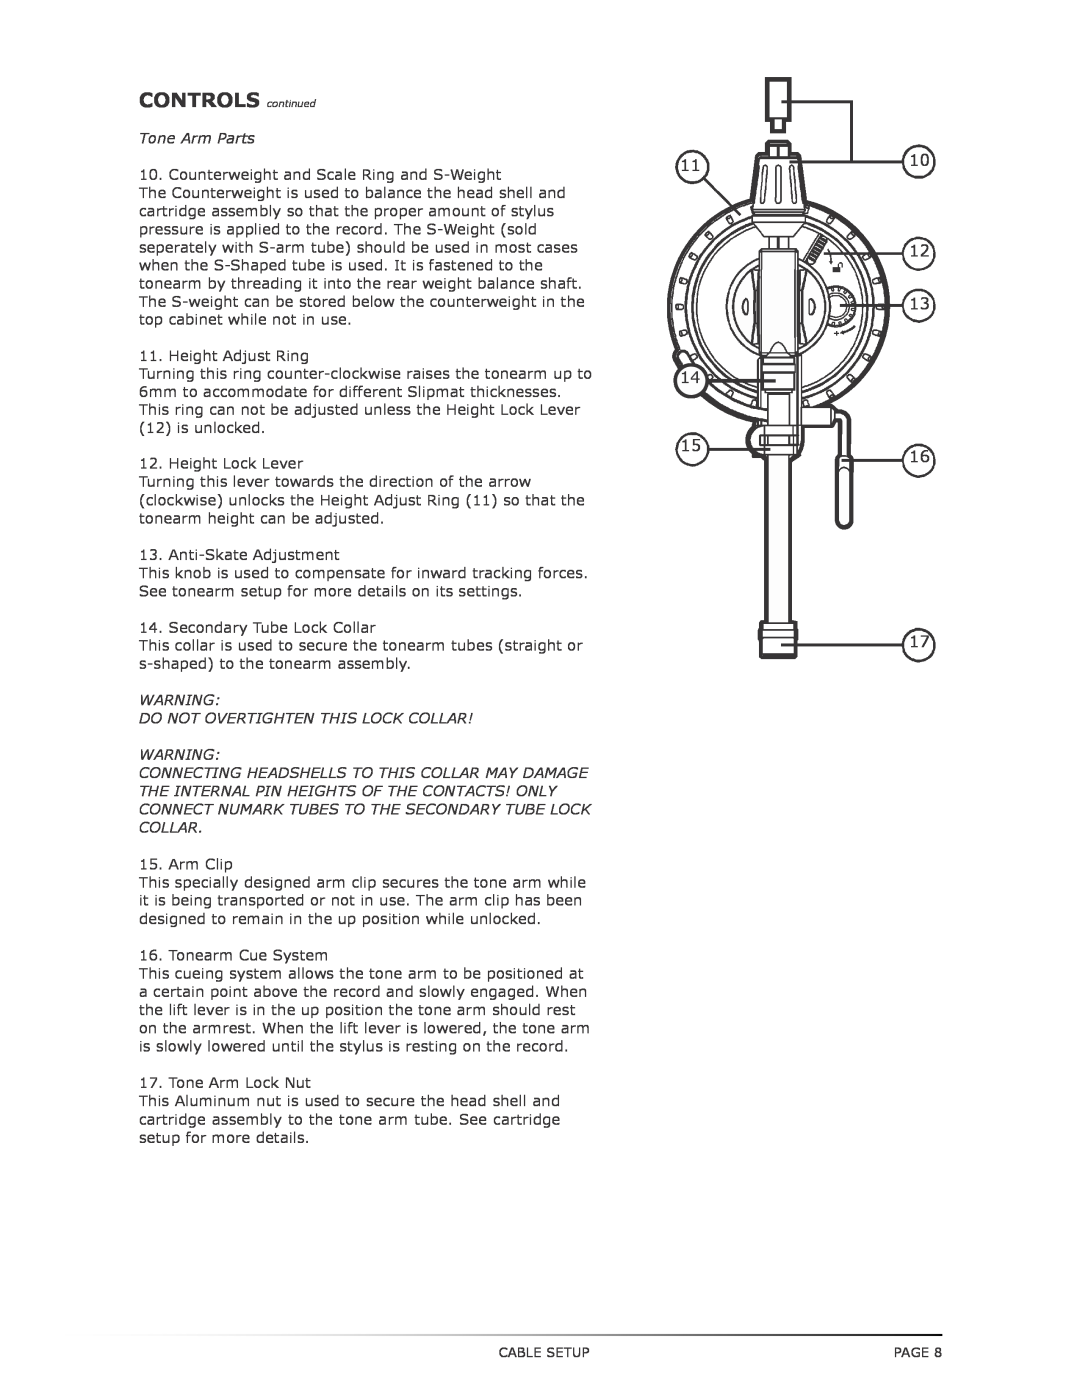 Numark Industries TT200 operating instructions CONTROLS continued, Tone Arm Parts, Do Not Overtighten This Lock Collar 